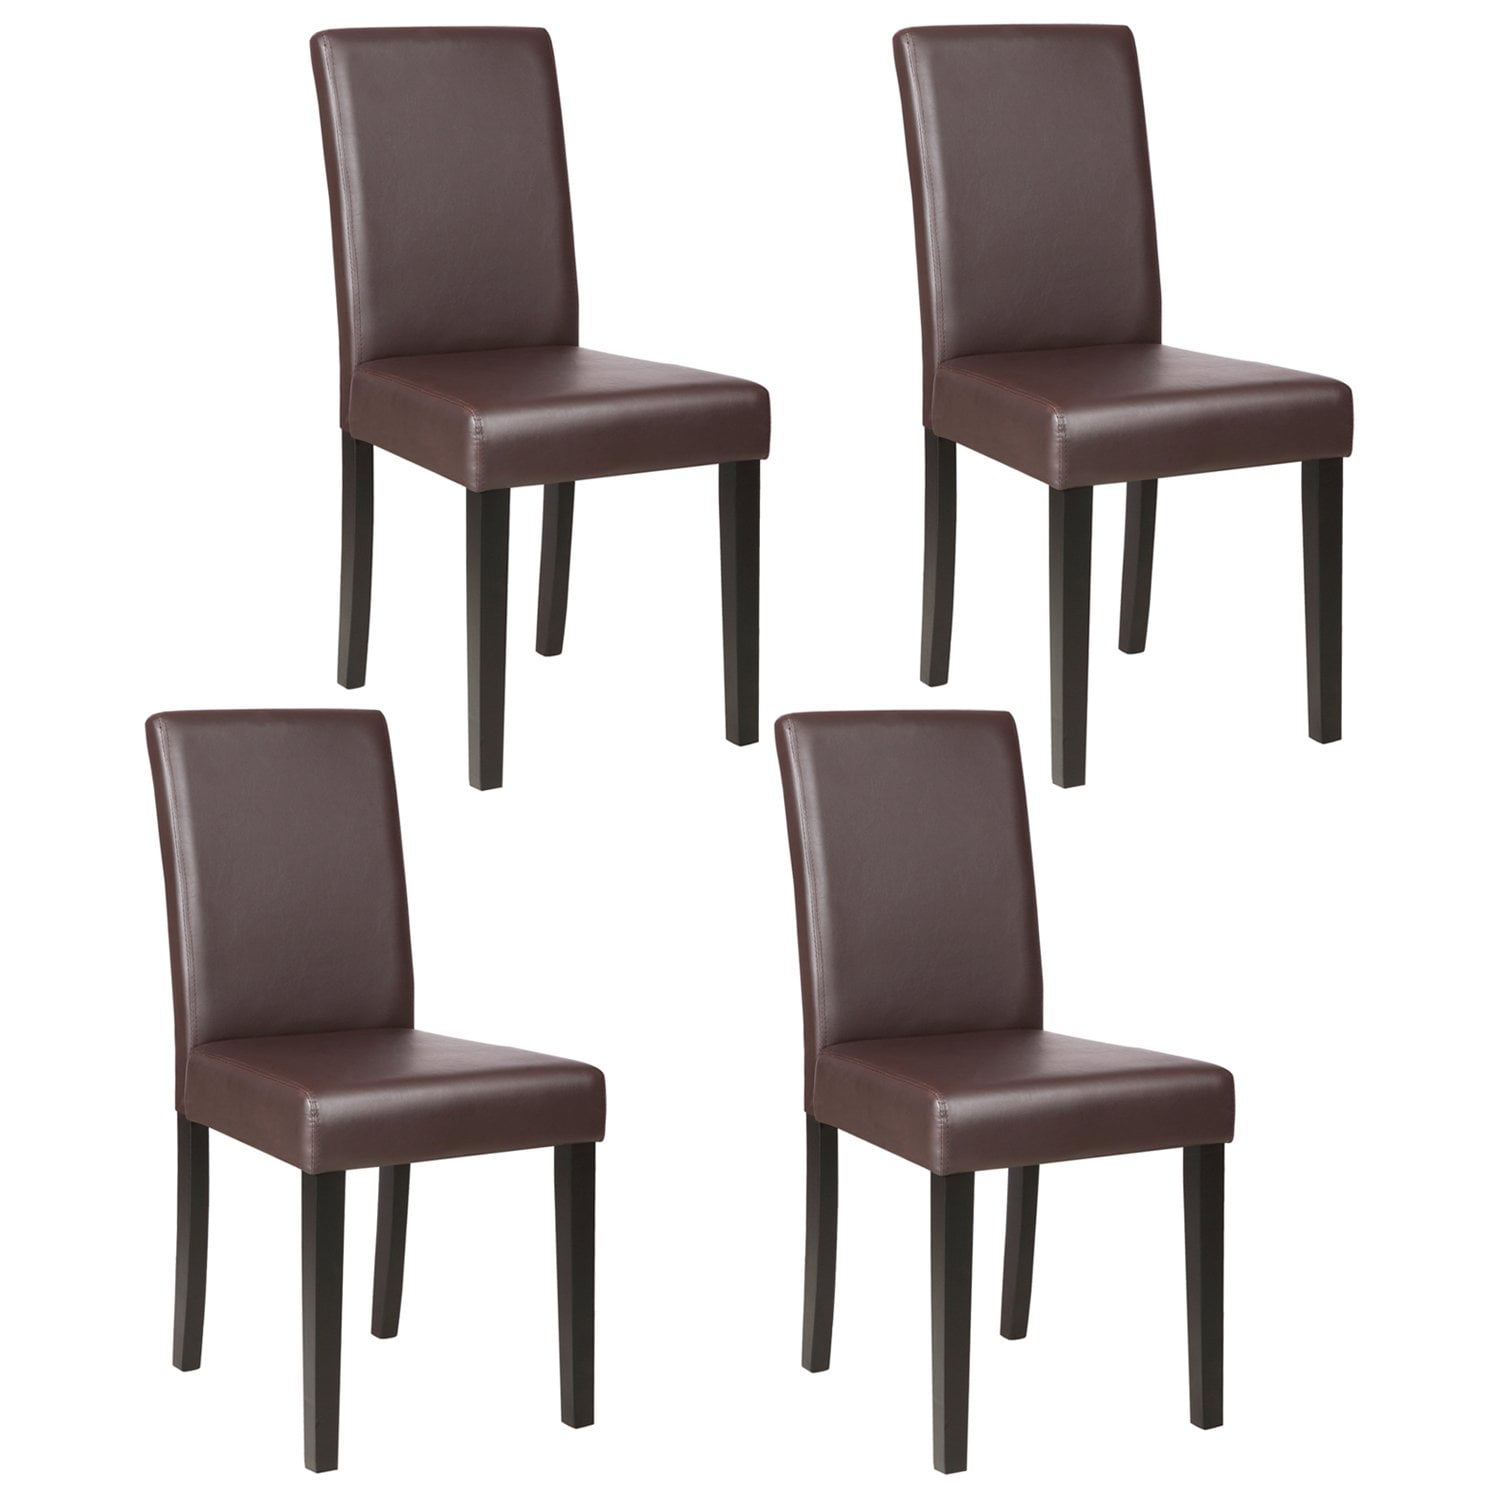 Mecor Dining Chairs Set of 4,Kitchen Leather Chair with Solid Wood Legs